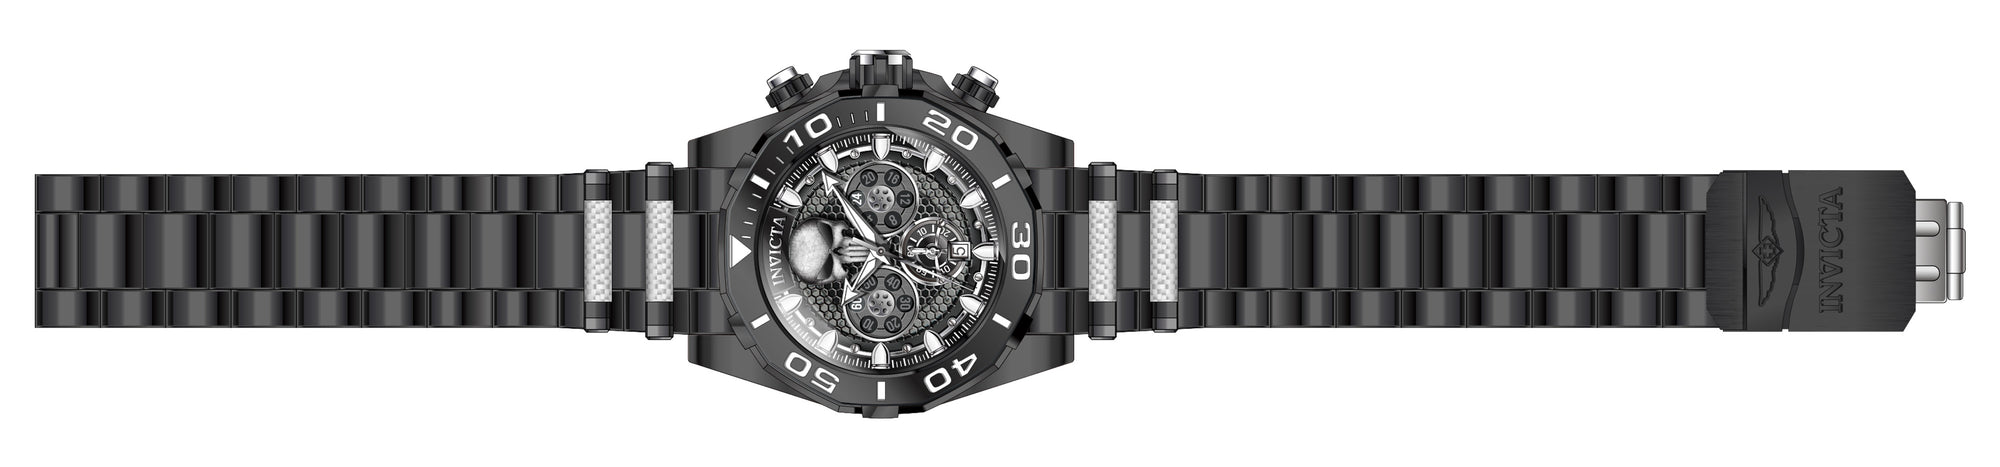 Band For Invicta Marvel 37684